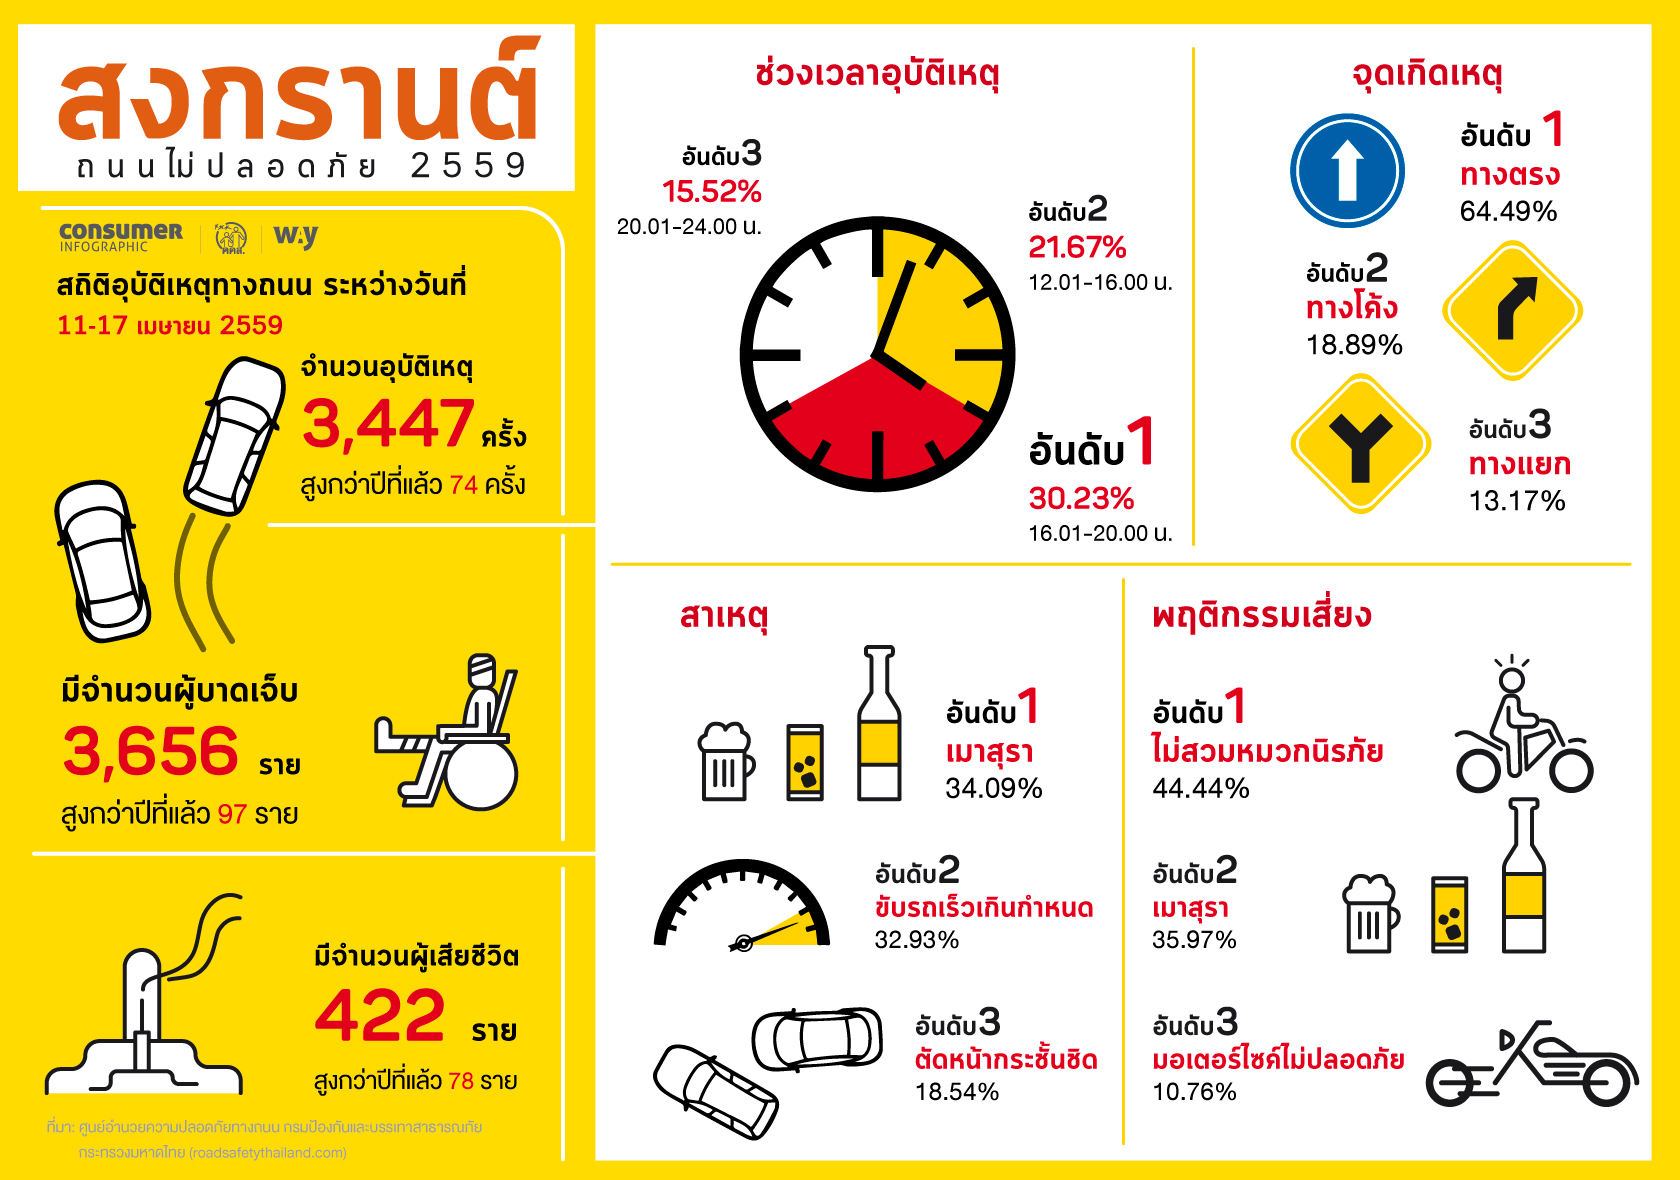 songkran accident rate